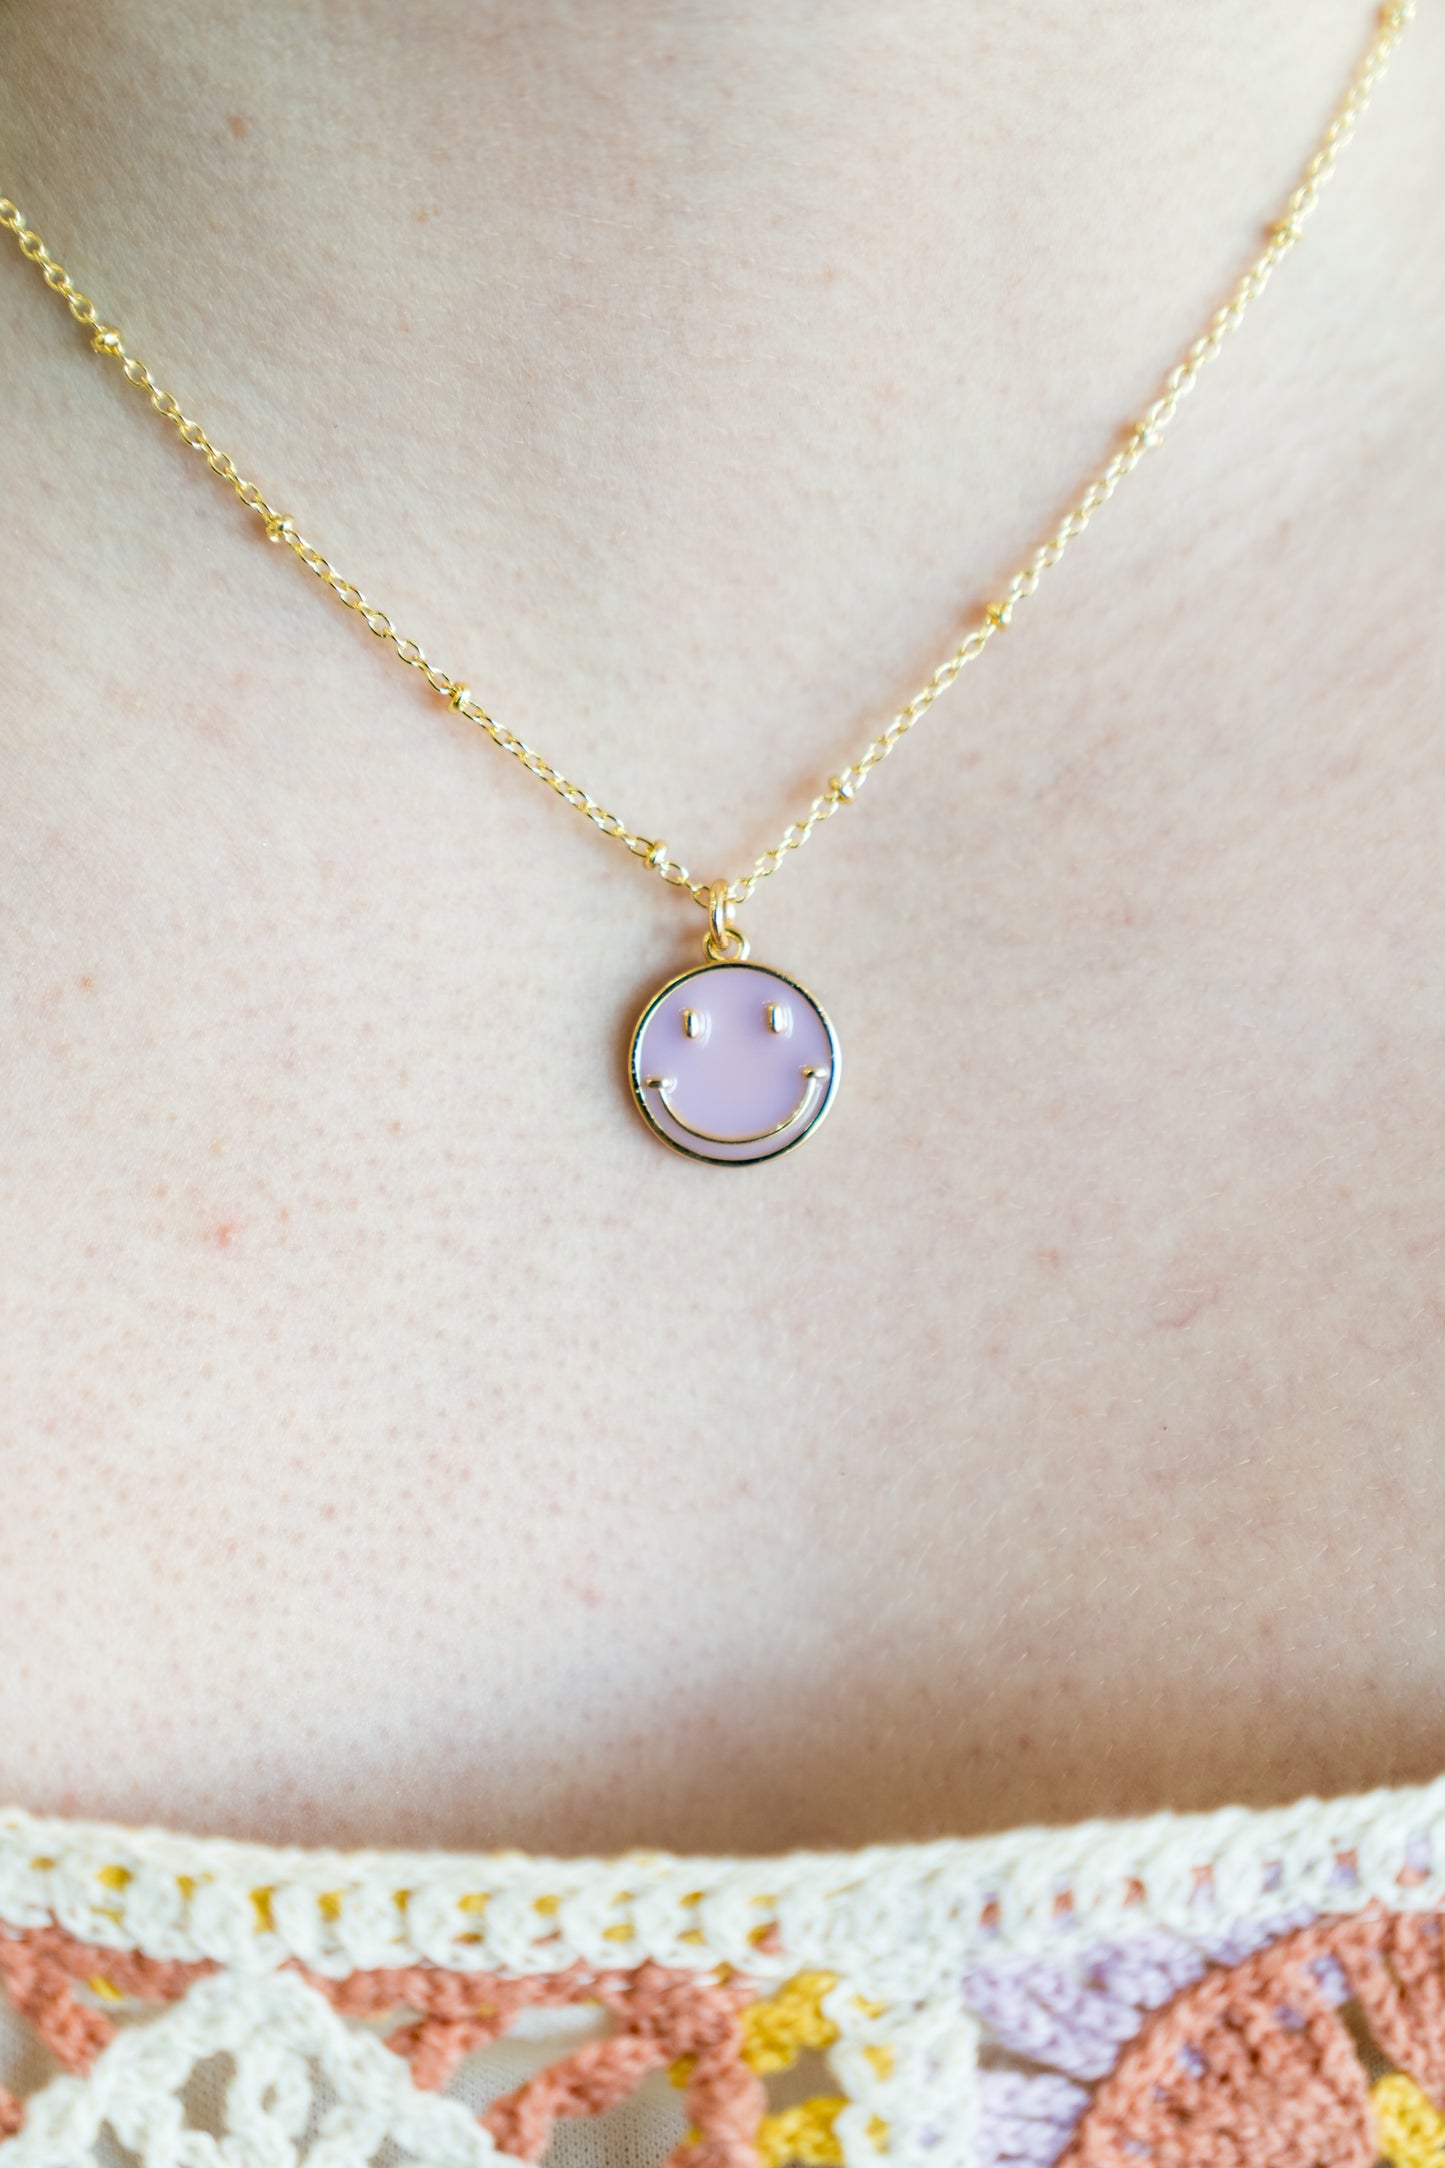 Smiles All Around Necklace (Dainty Ball Chain)